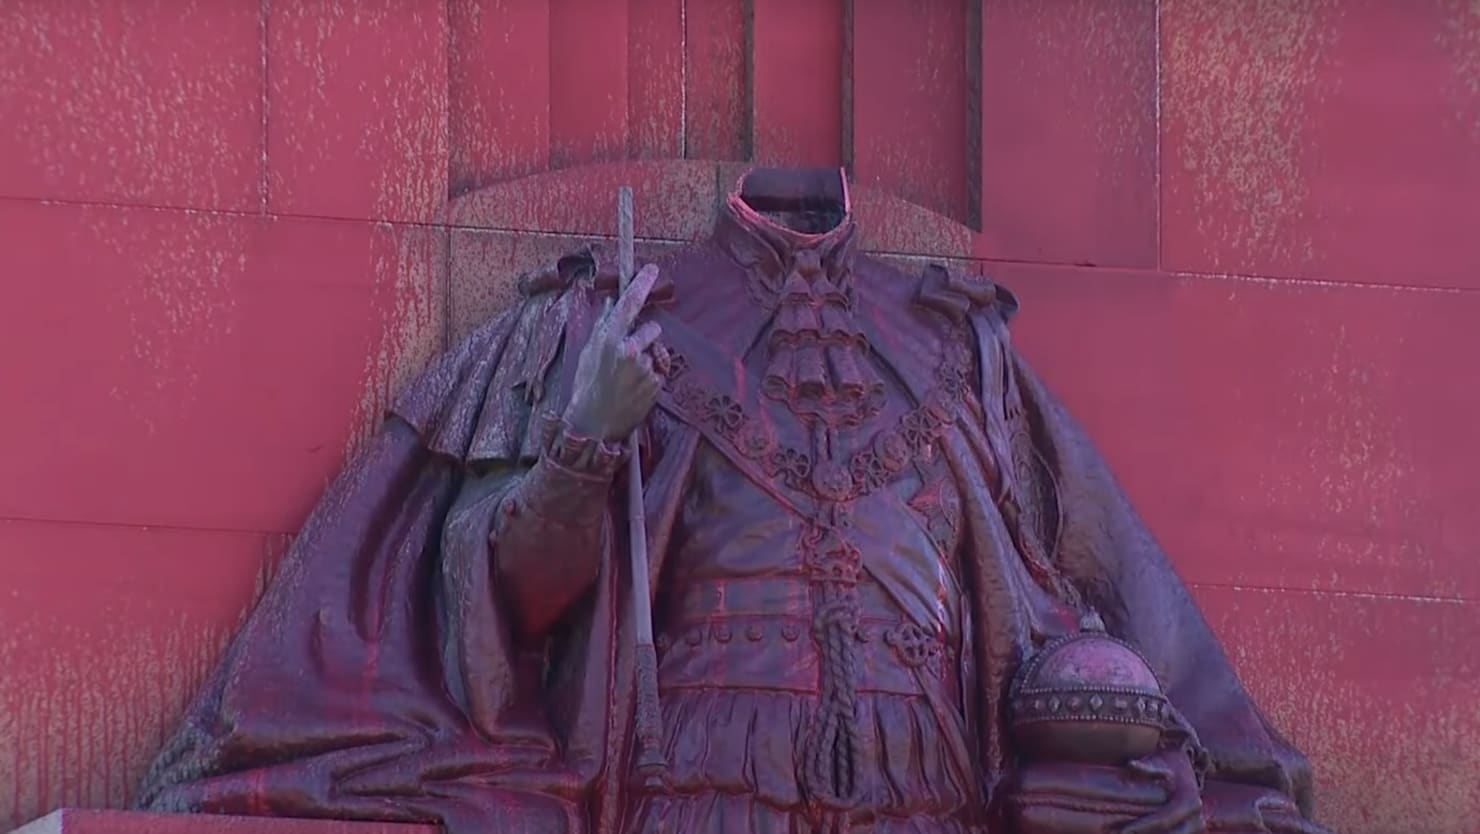 Statue of King George V Beheaded in Latest Melbourne Vandalism on King Charles III's Birthday